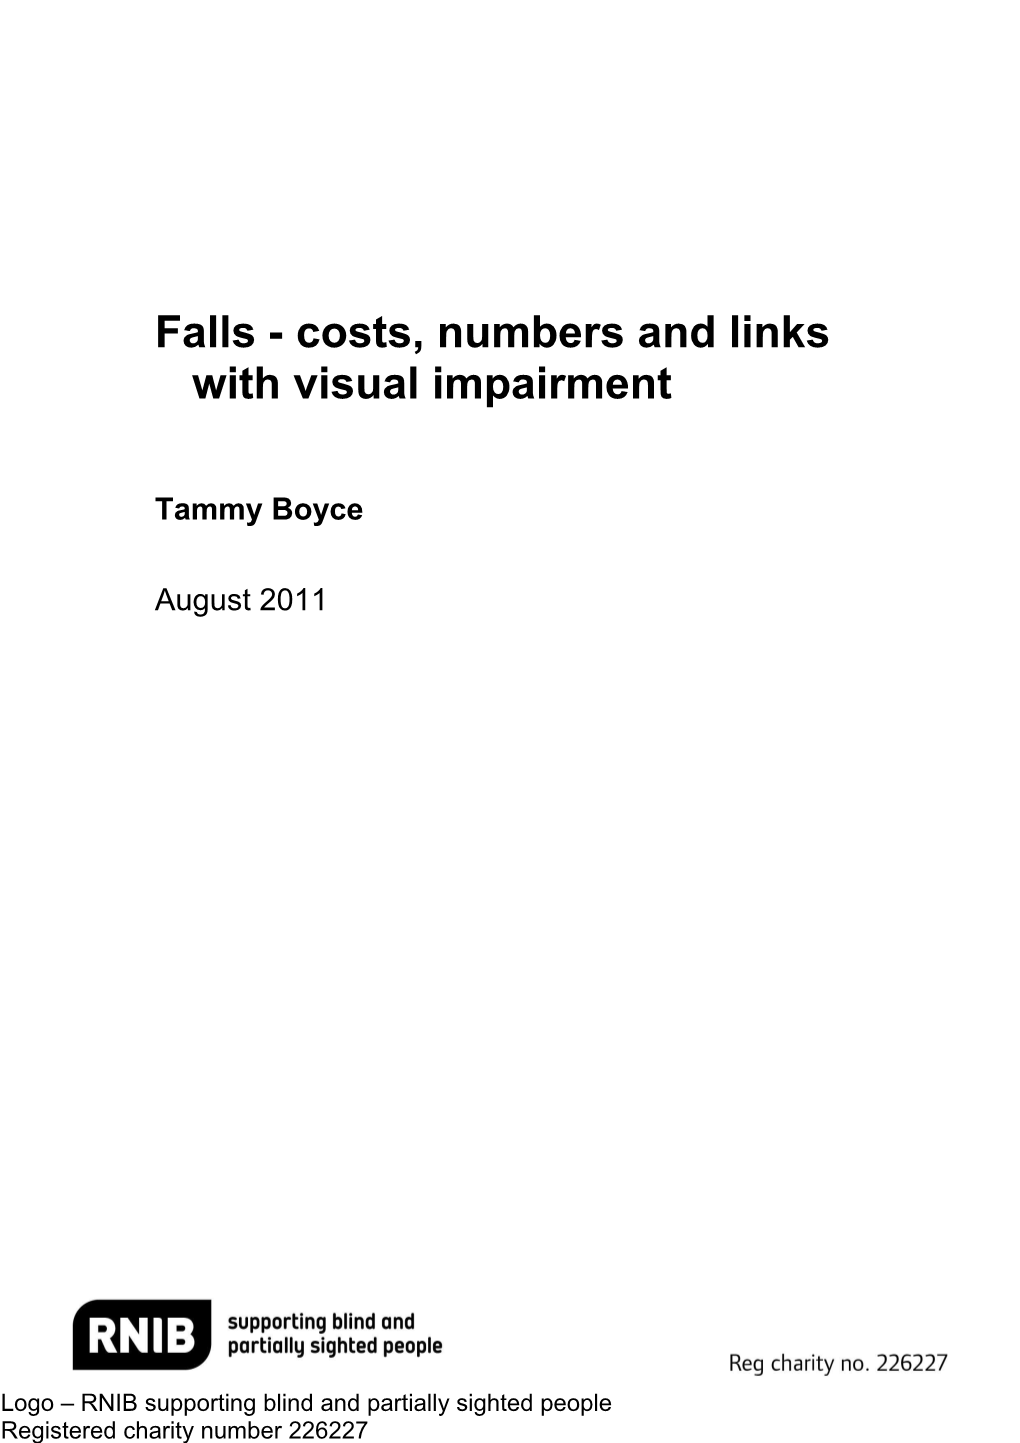 Falls Costs, Numbers and Links with Visual Impairment